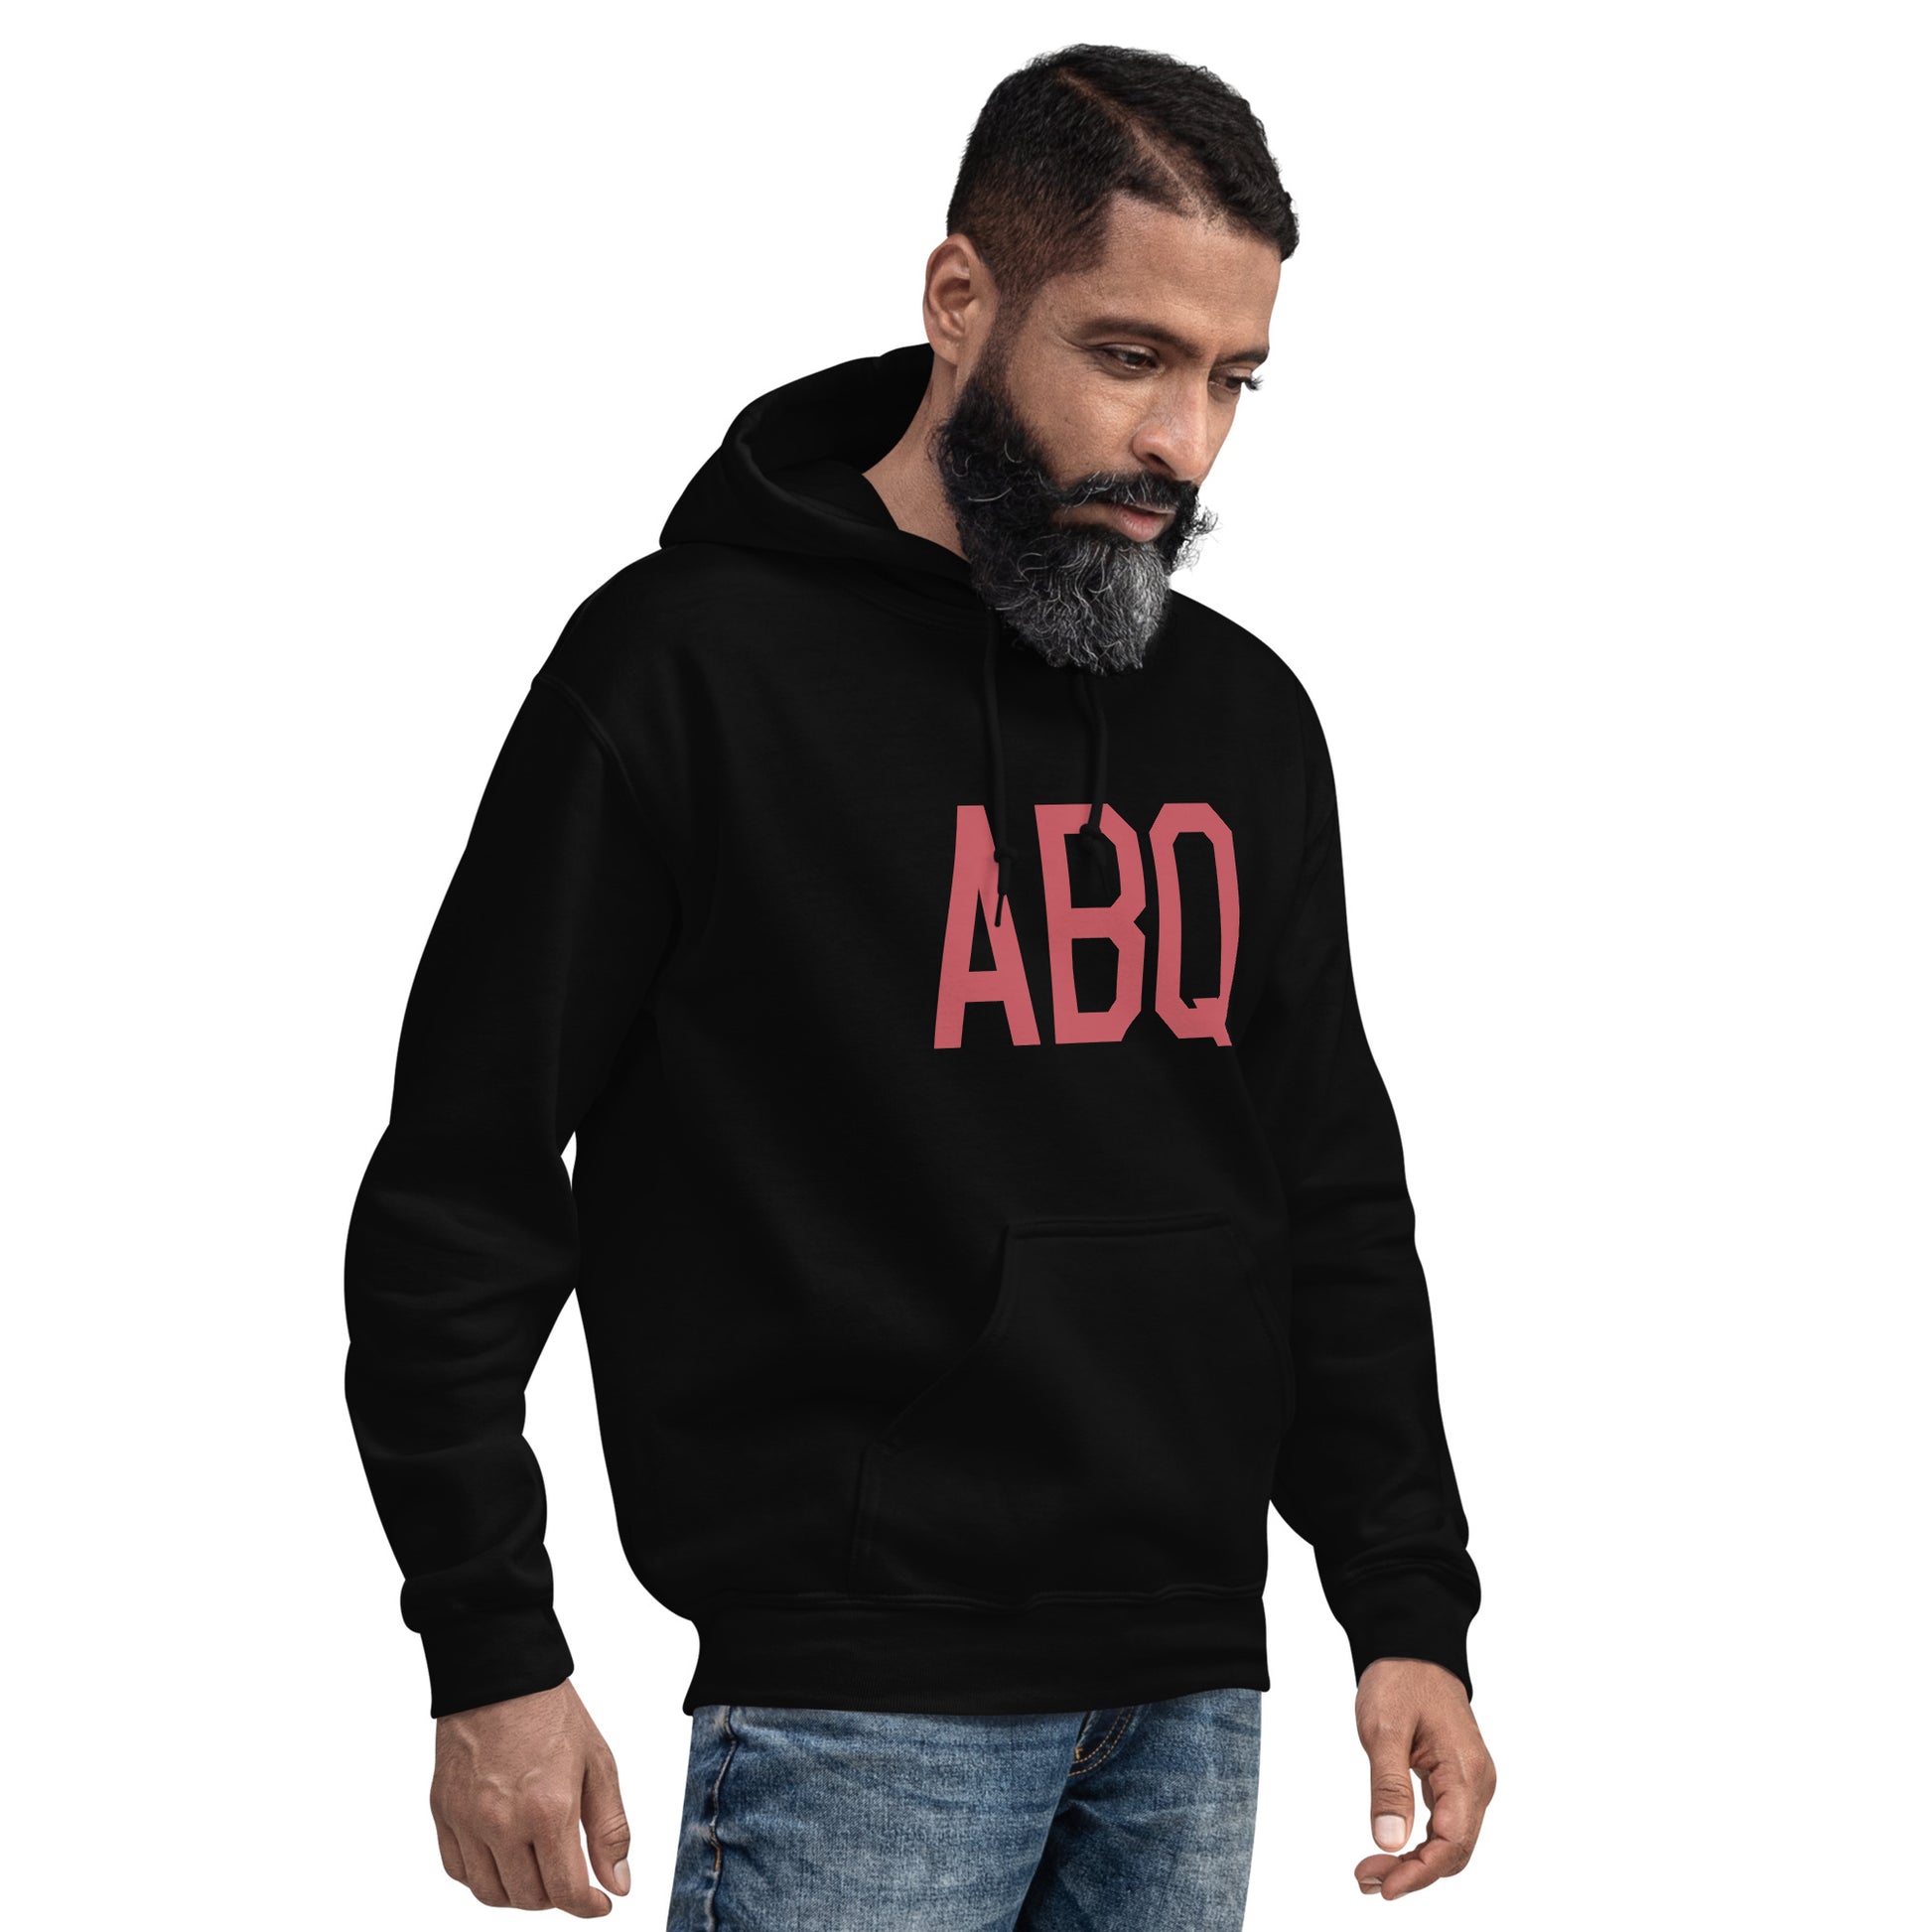 Aviation Enthusiast Hoodie - Deep Pink Graphic • ABQ Albuquerque • YHM Designs - Image 06